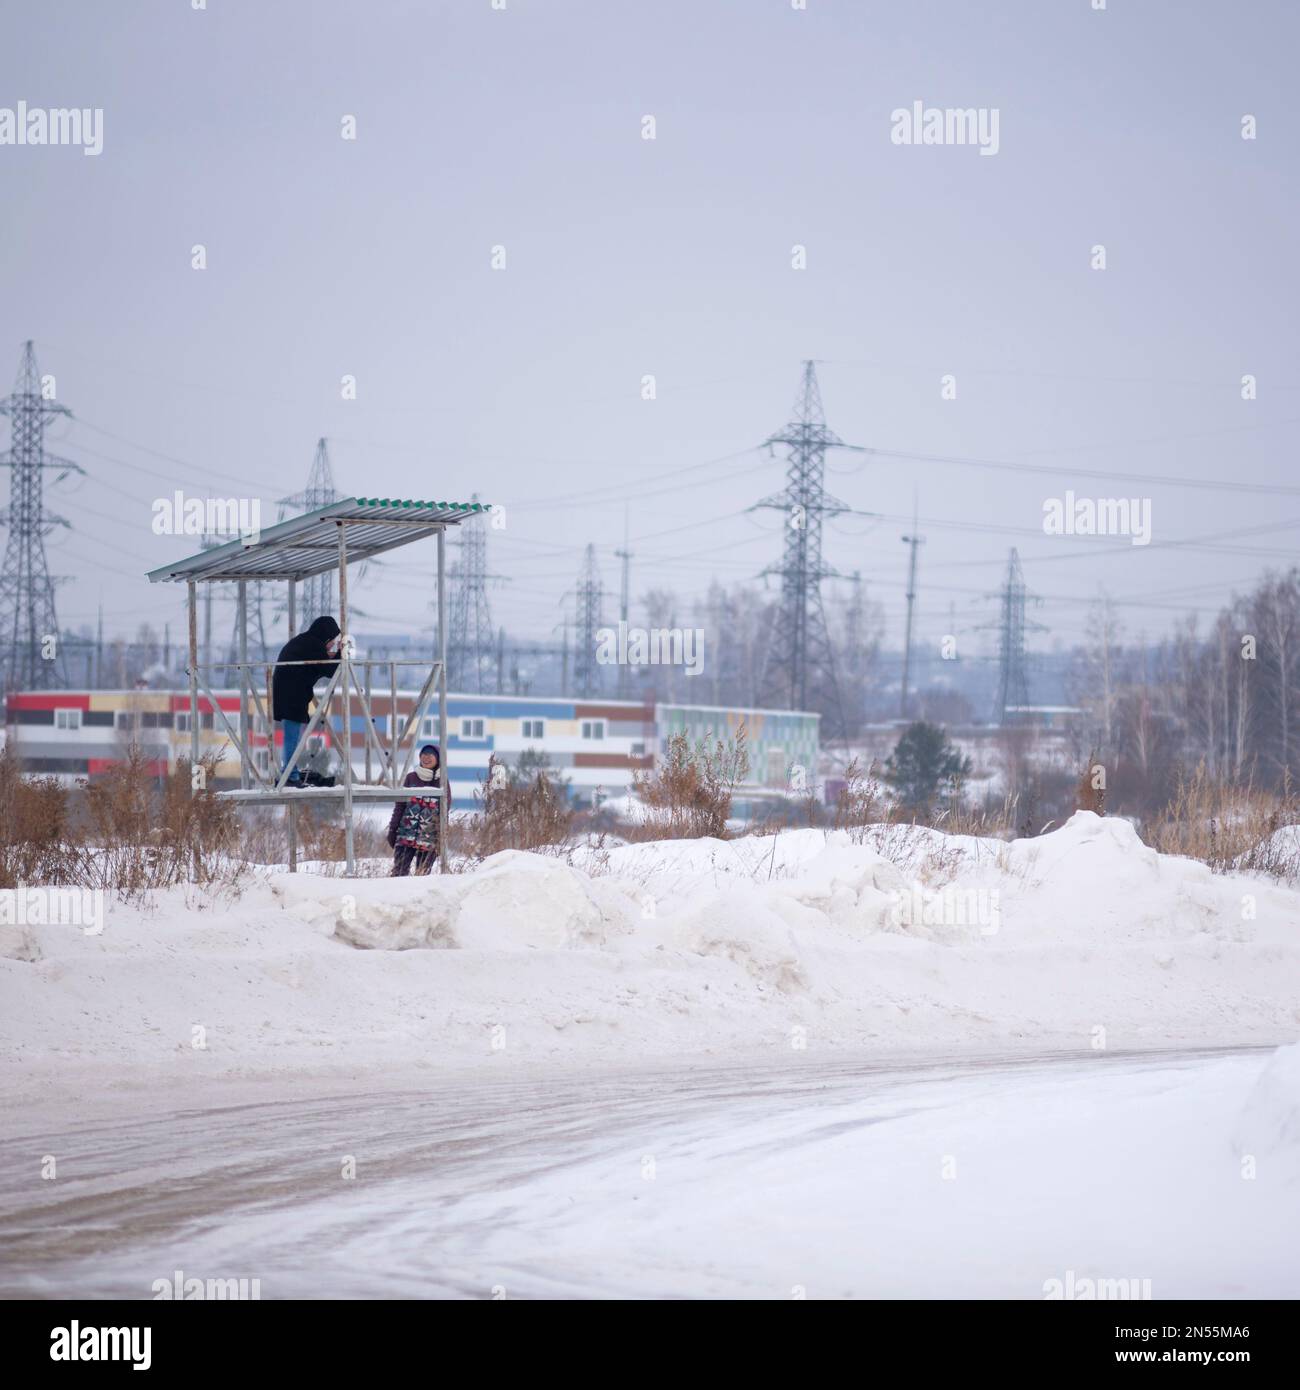 A photographer on a hill takes a picture of the road next to a smiling girl in winter from a tripod. Stock Photo